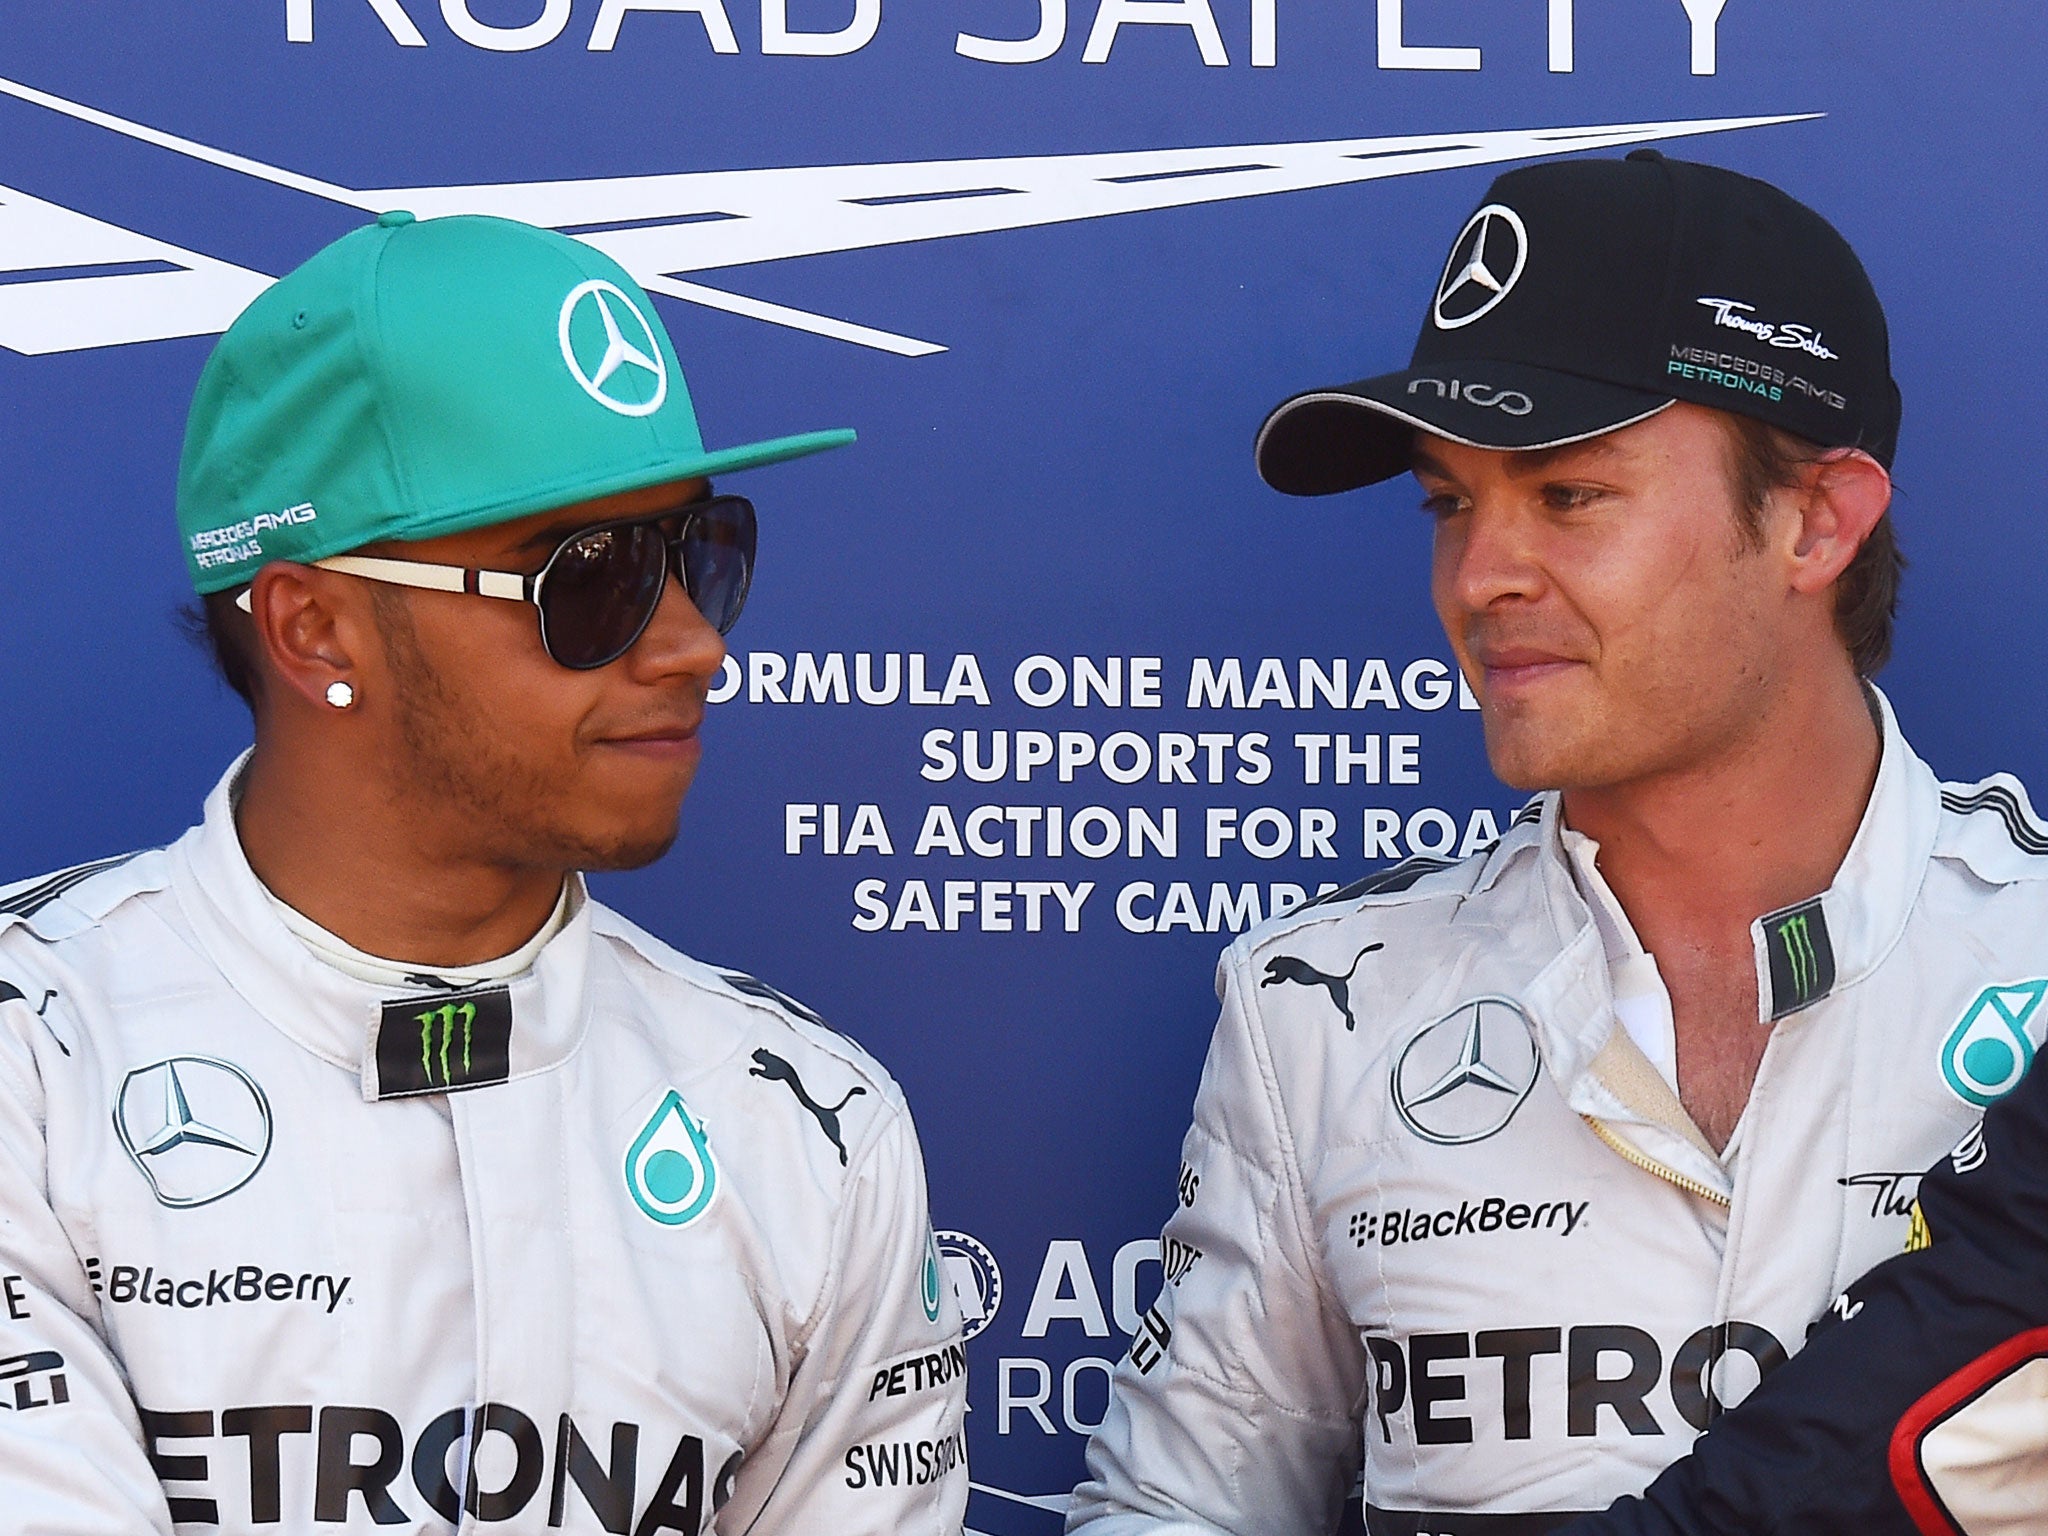 Mercedes teammates Lewis Hamilton and Nico Rosberg lock out the front of the grid